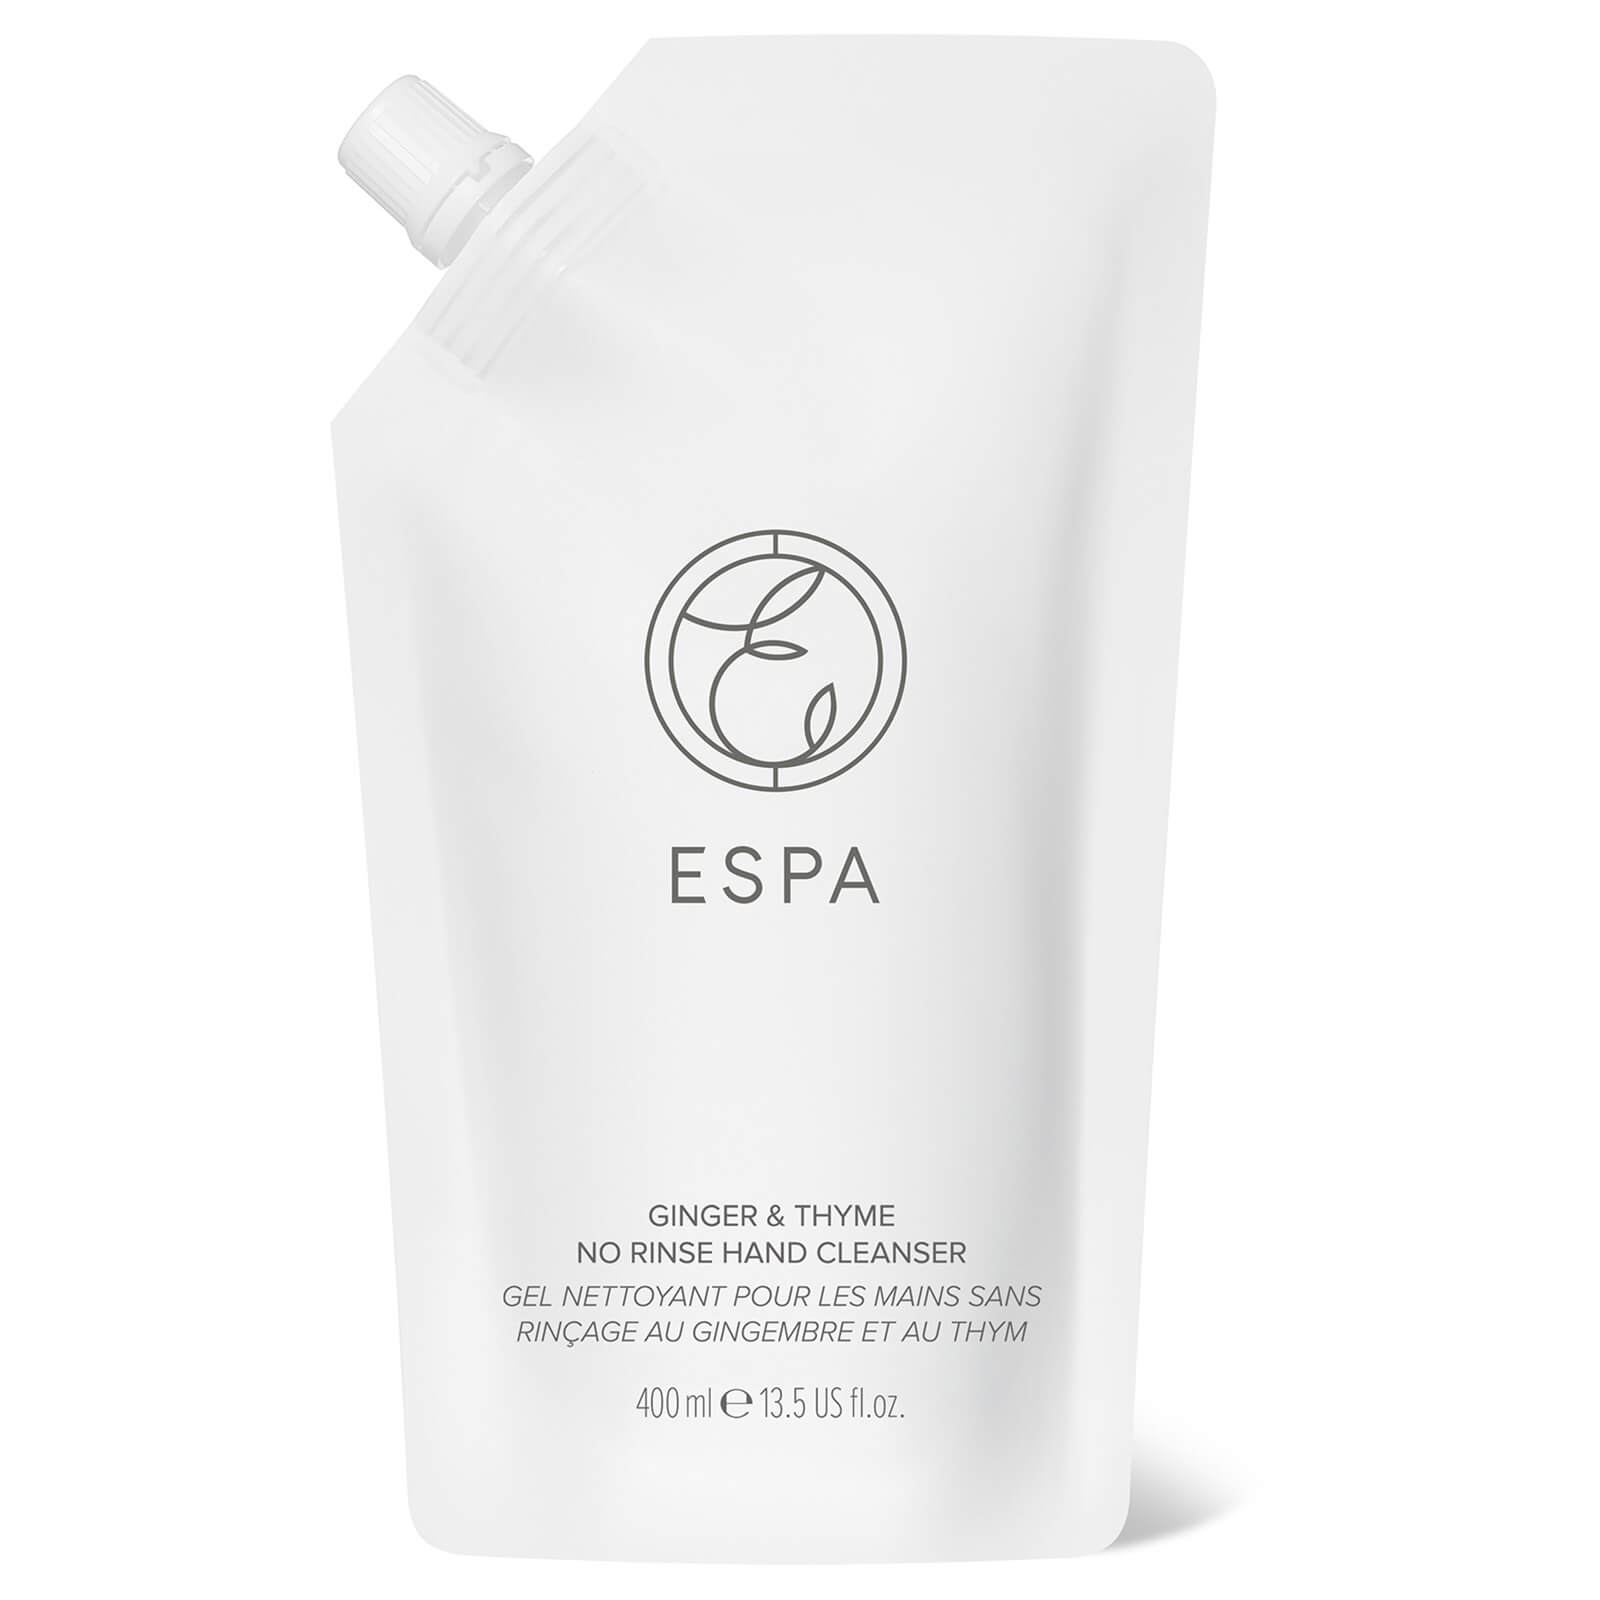 ESPA Essentials No Rinse Hand Cleanser 400ml - Ginger and Thyme